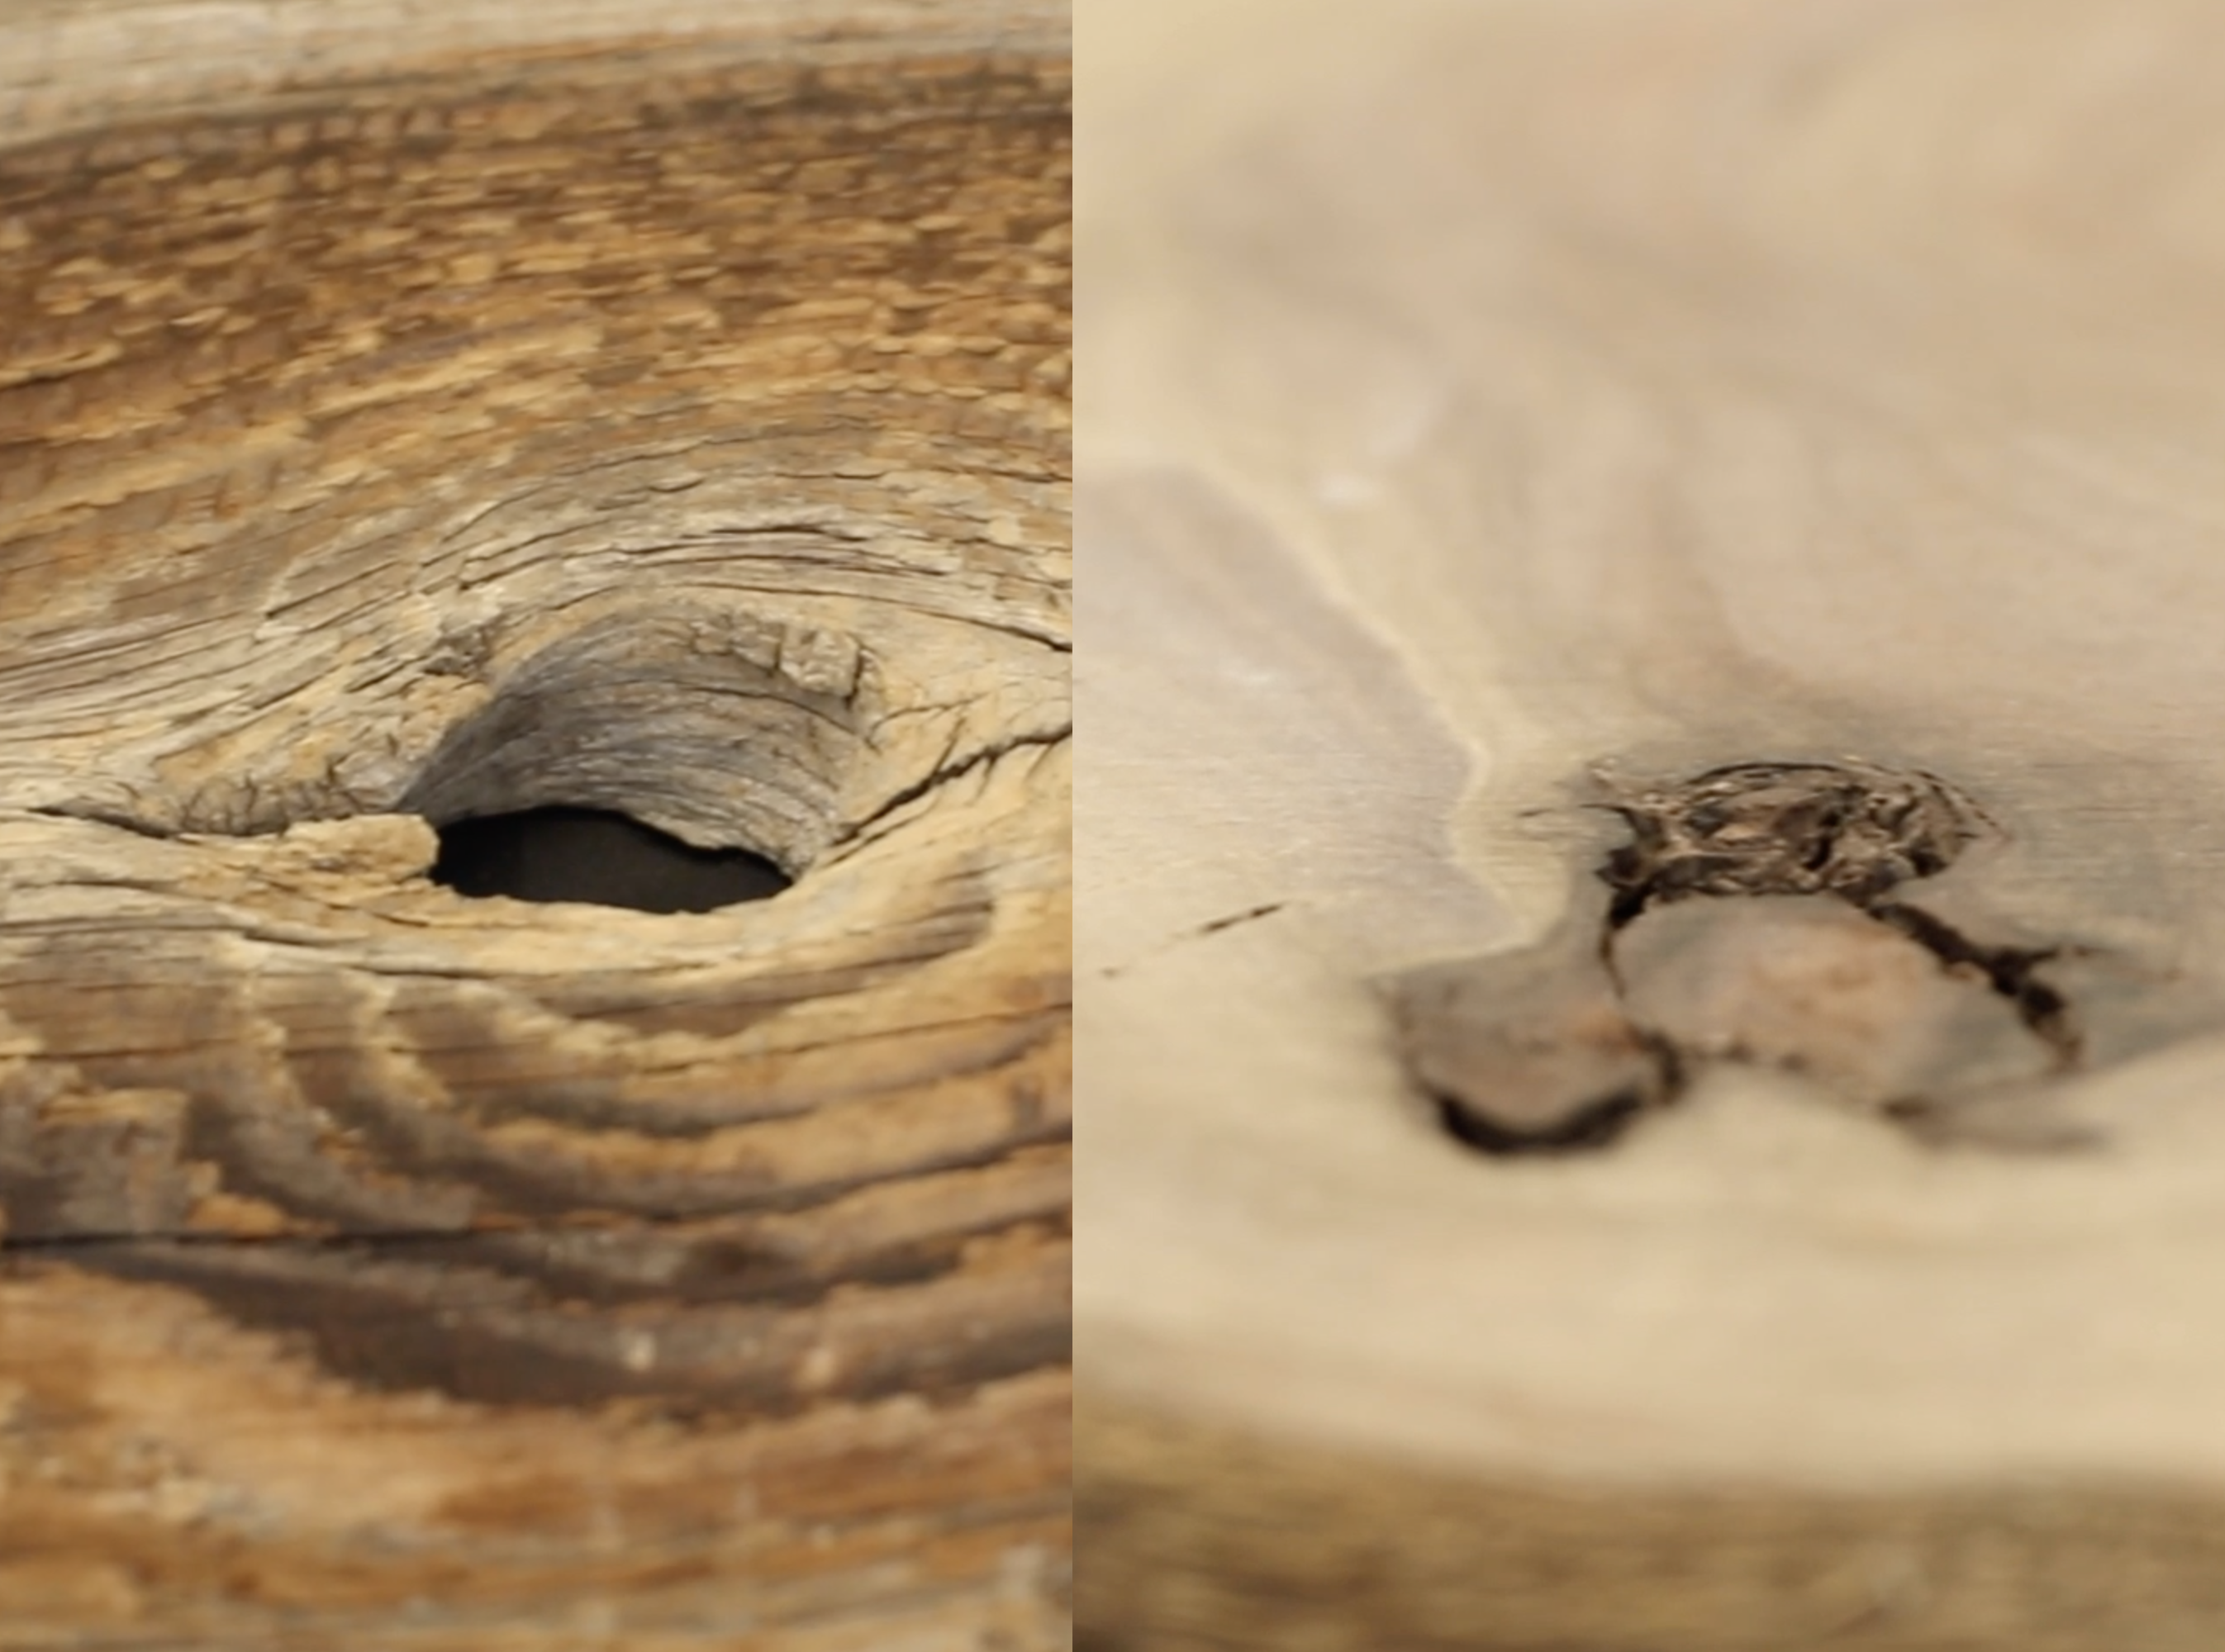 How To Fix Wood Holes & Cracks With Epoxy Resin In 4 Steps: Industrial Clear